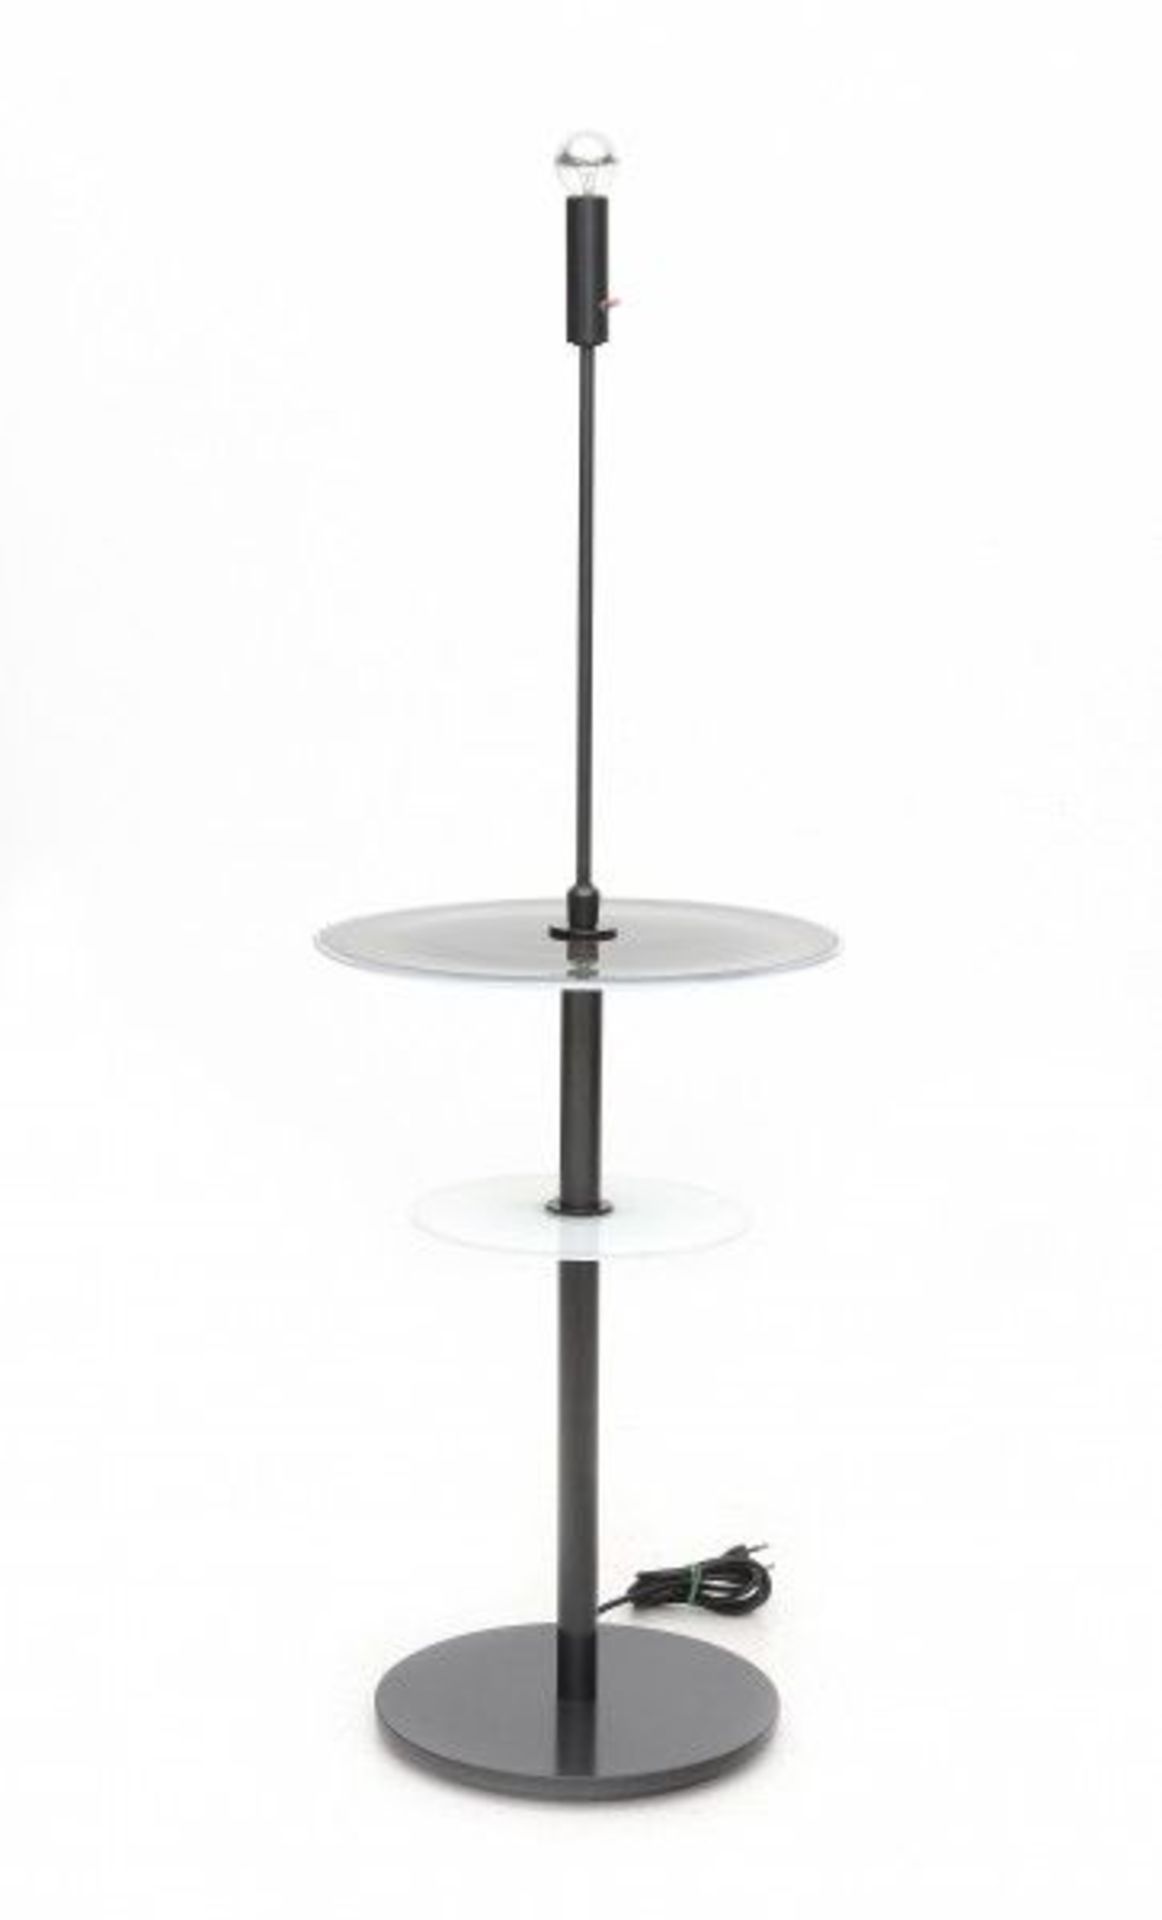 Daniela Puppa & Franco RaggiA glass and metal occasional table with integrated lamp, model Altair - Bild 2 aus 2